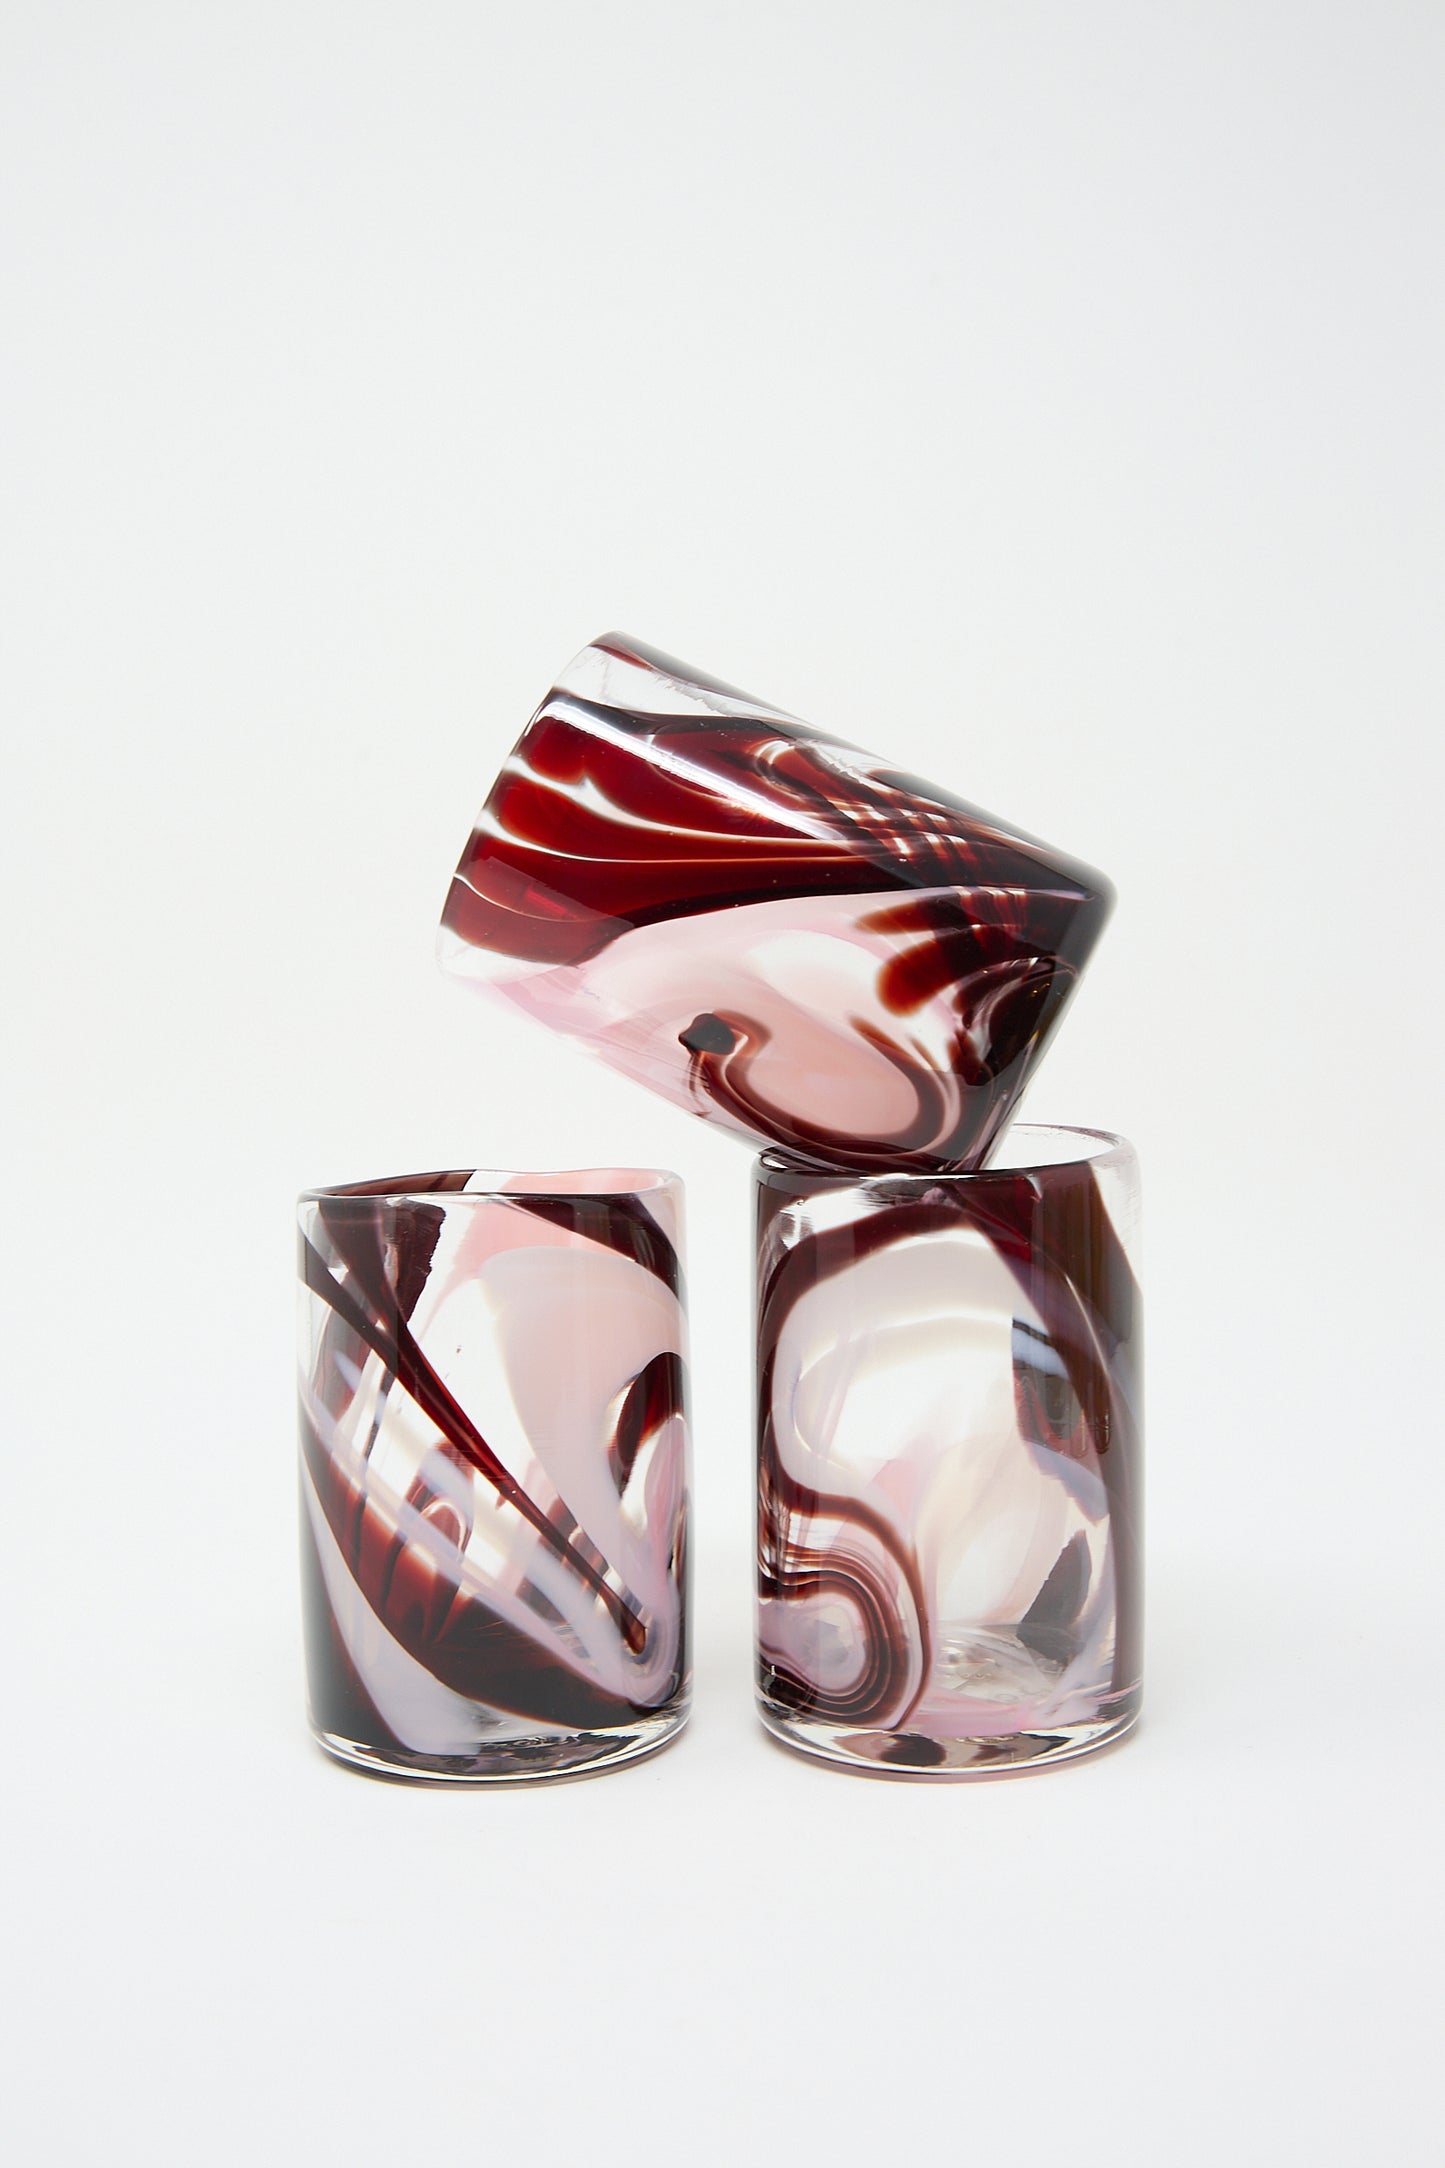 Three Gamay Cups crafted by artisans in NYC, featuring unique abstract swirling red and white patterns, one tipped on its side. (Brand: Upstate)